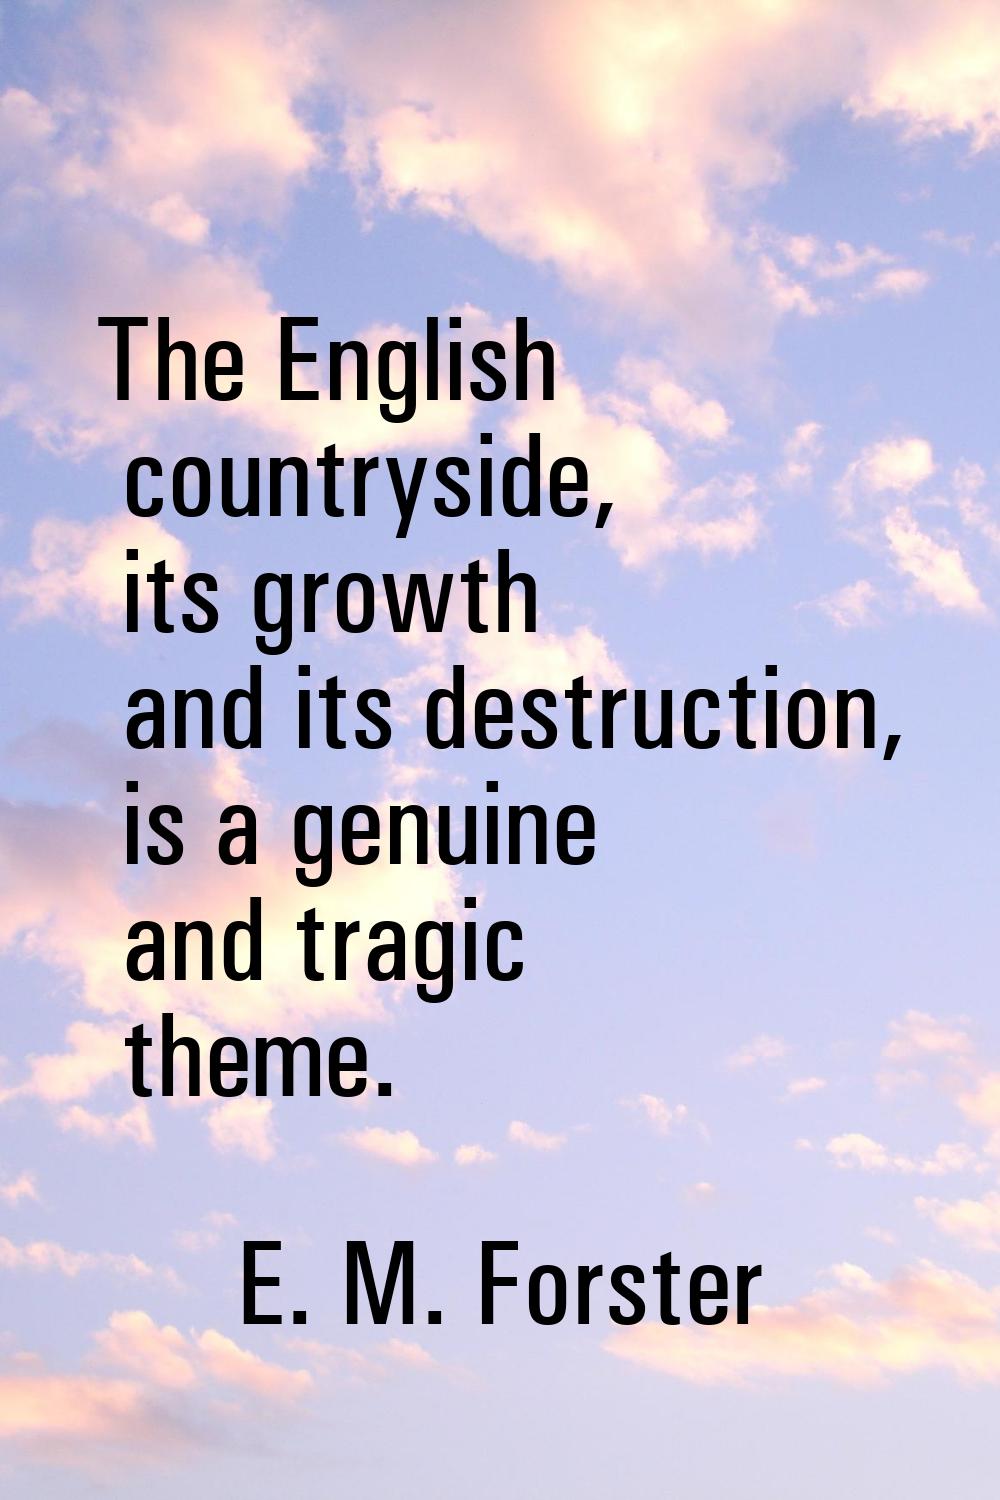 The English countryside, its growth and its destruction, is a genuine and tragic theme.